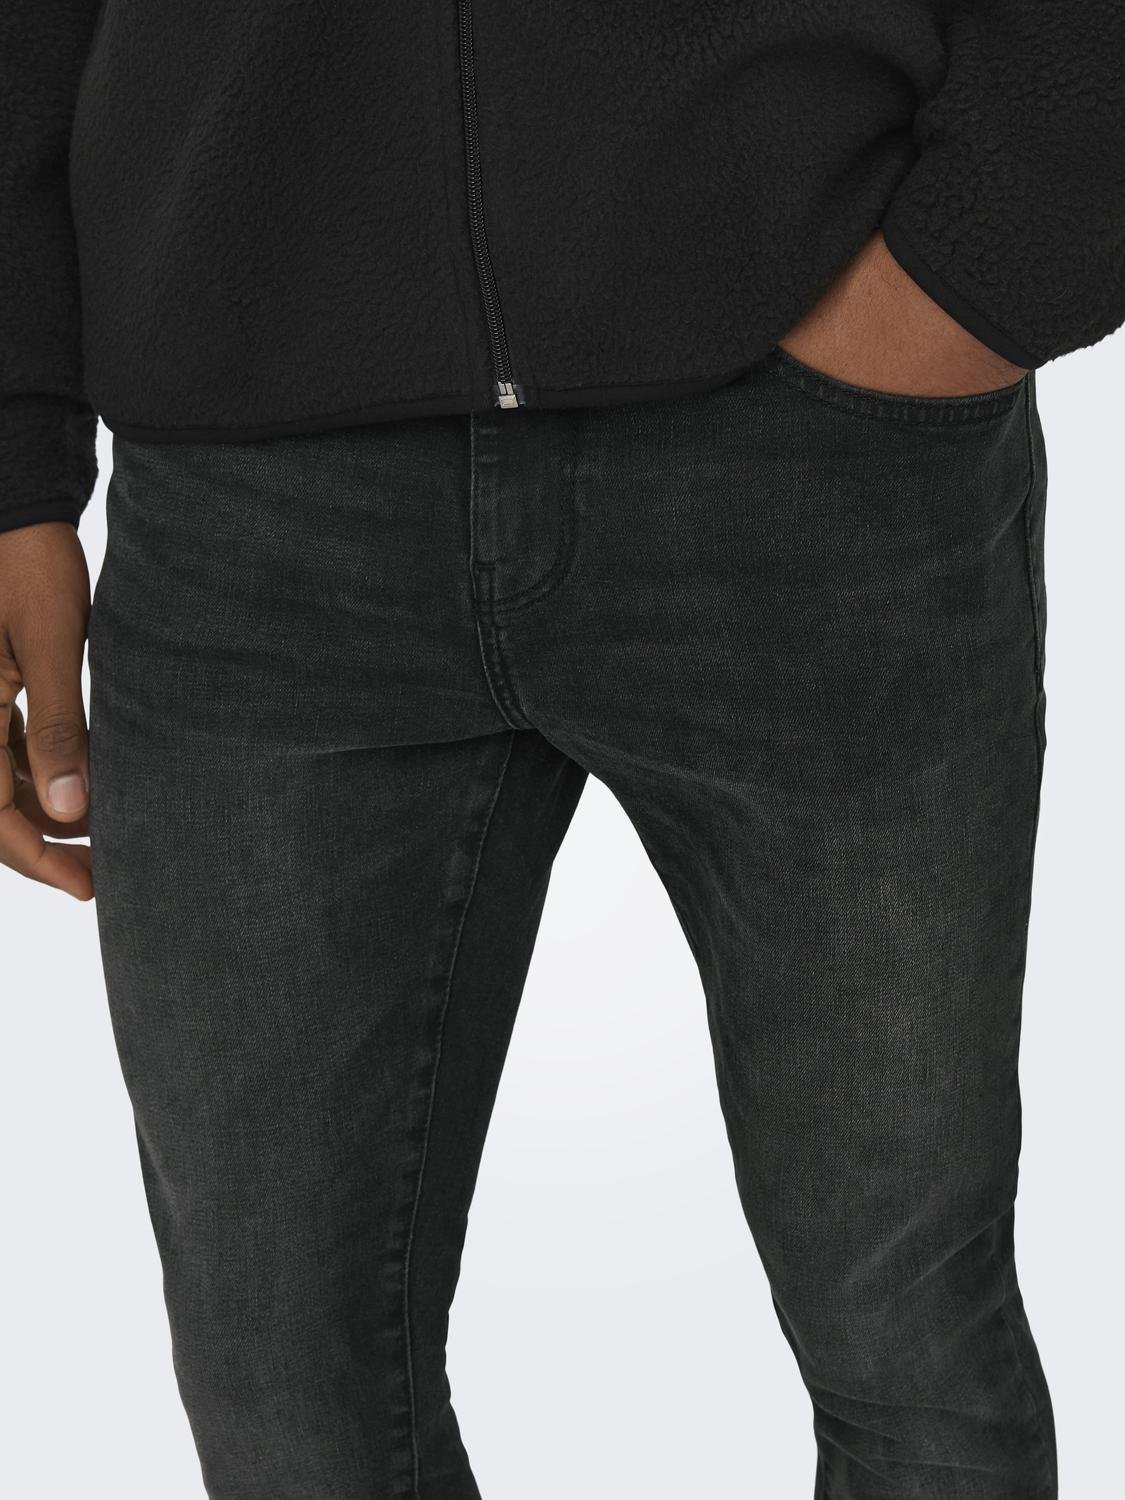 ONLY & SONS Jeans Spray on Fit Taille moyenne -Black Denim - 22027848